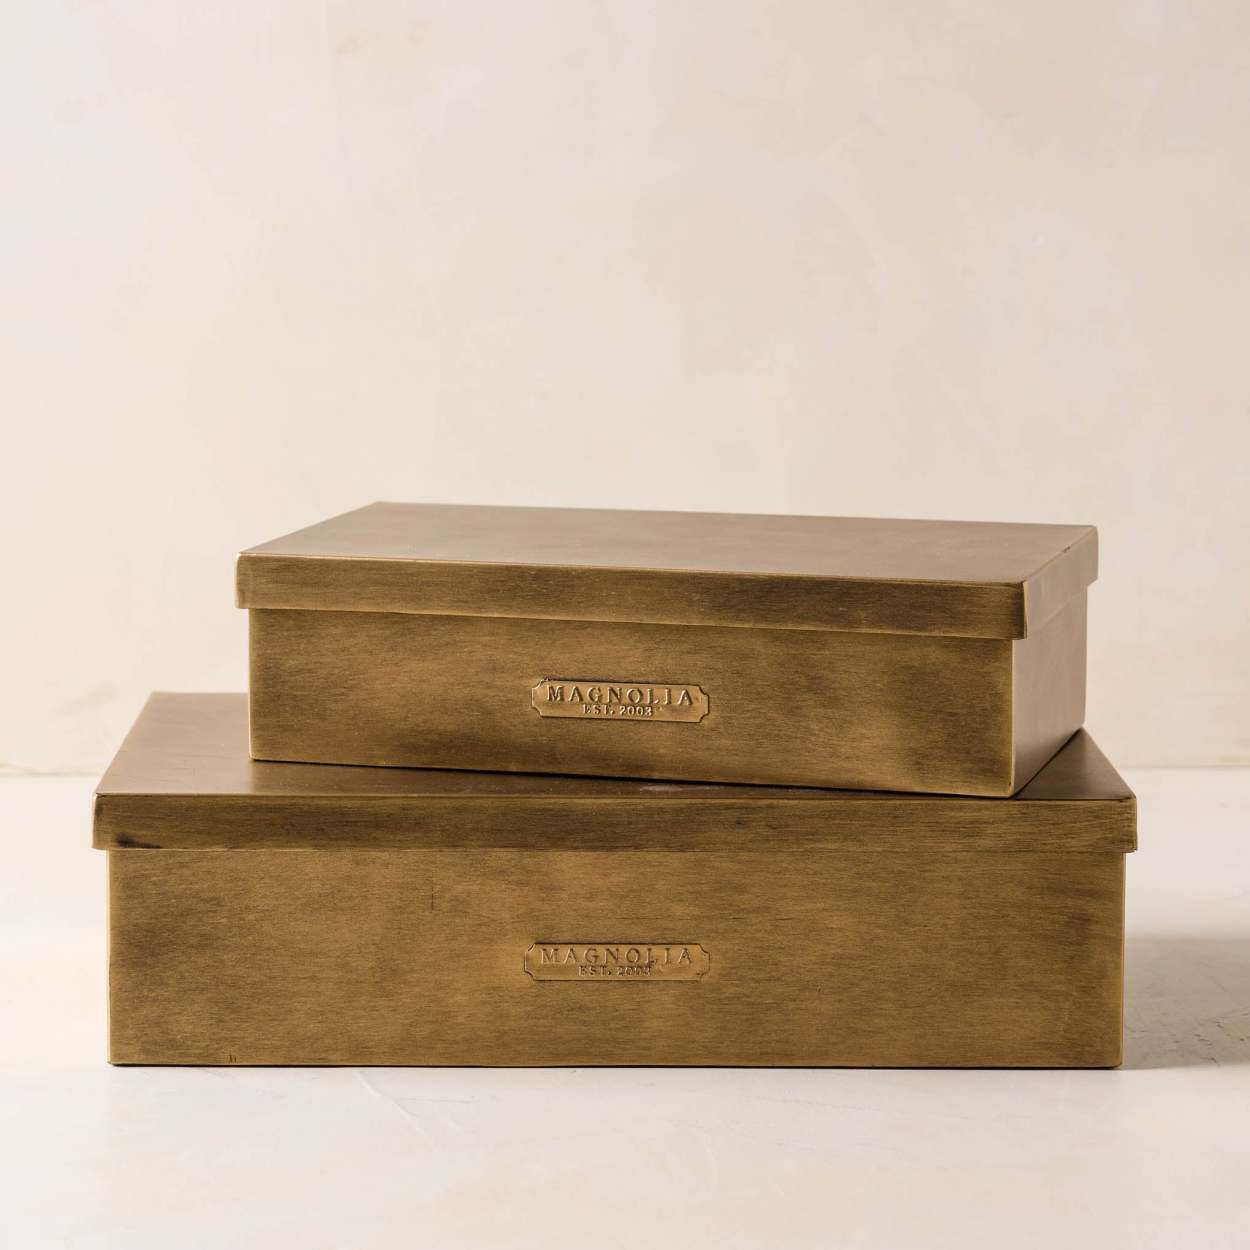 Classic, warm, and structured—these antique-inspired boxes are a timeless way to style consoles... | Magnolia